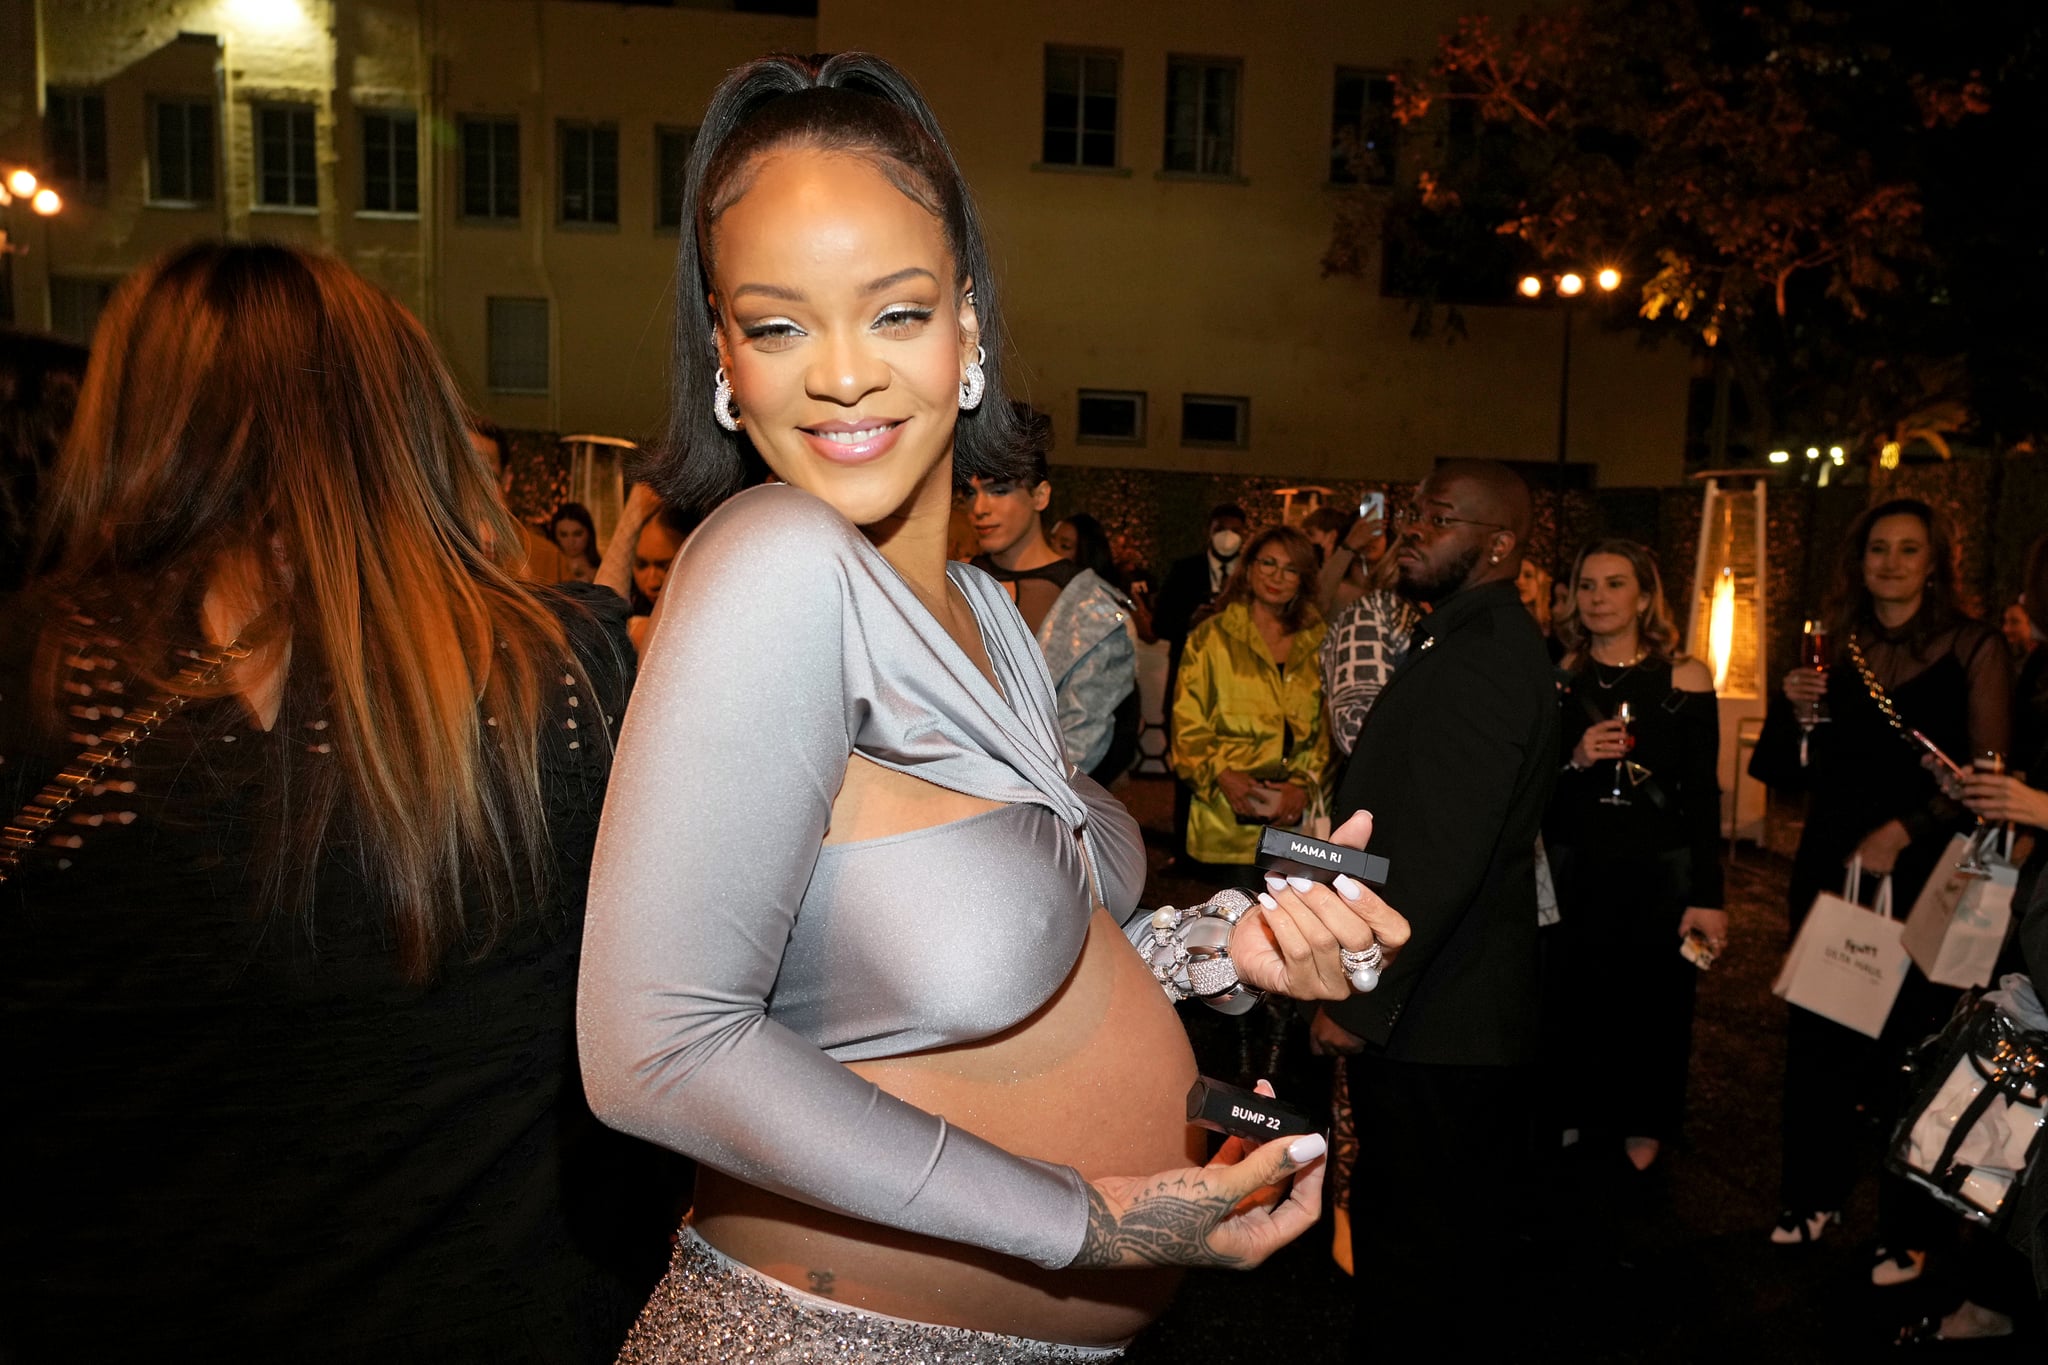 LOS ANGELES, CALIFORNIA - MARCH 12: Rihanna poses with engraved Fenty Beauty ICON Lipsticks as she celebrates the launch of Fenty Beauty at ULTA Beauty on March 12, 2022 in Los Angeles, California. (Photo by Kevin Mazur/Getty Images for Fenty Beauty by Rihanna)